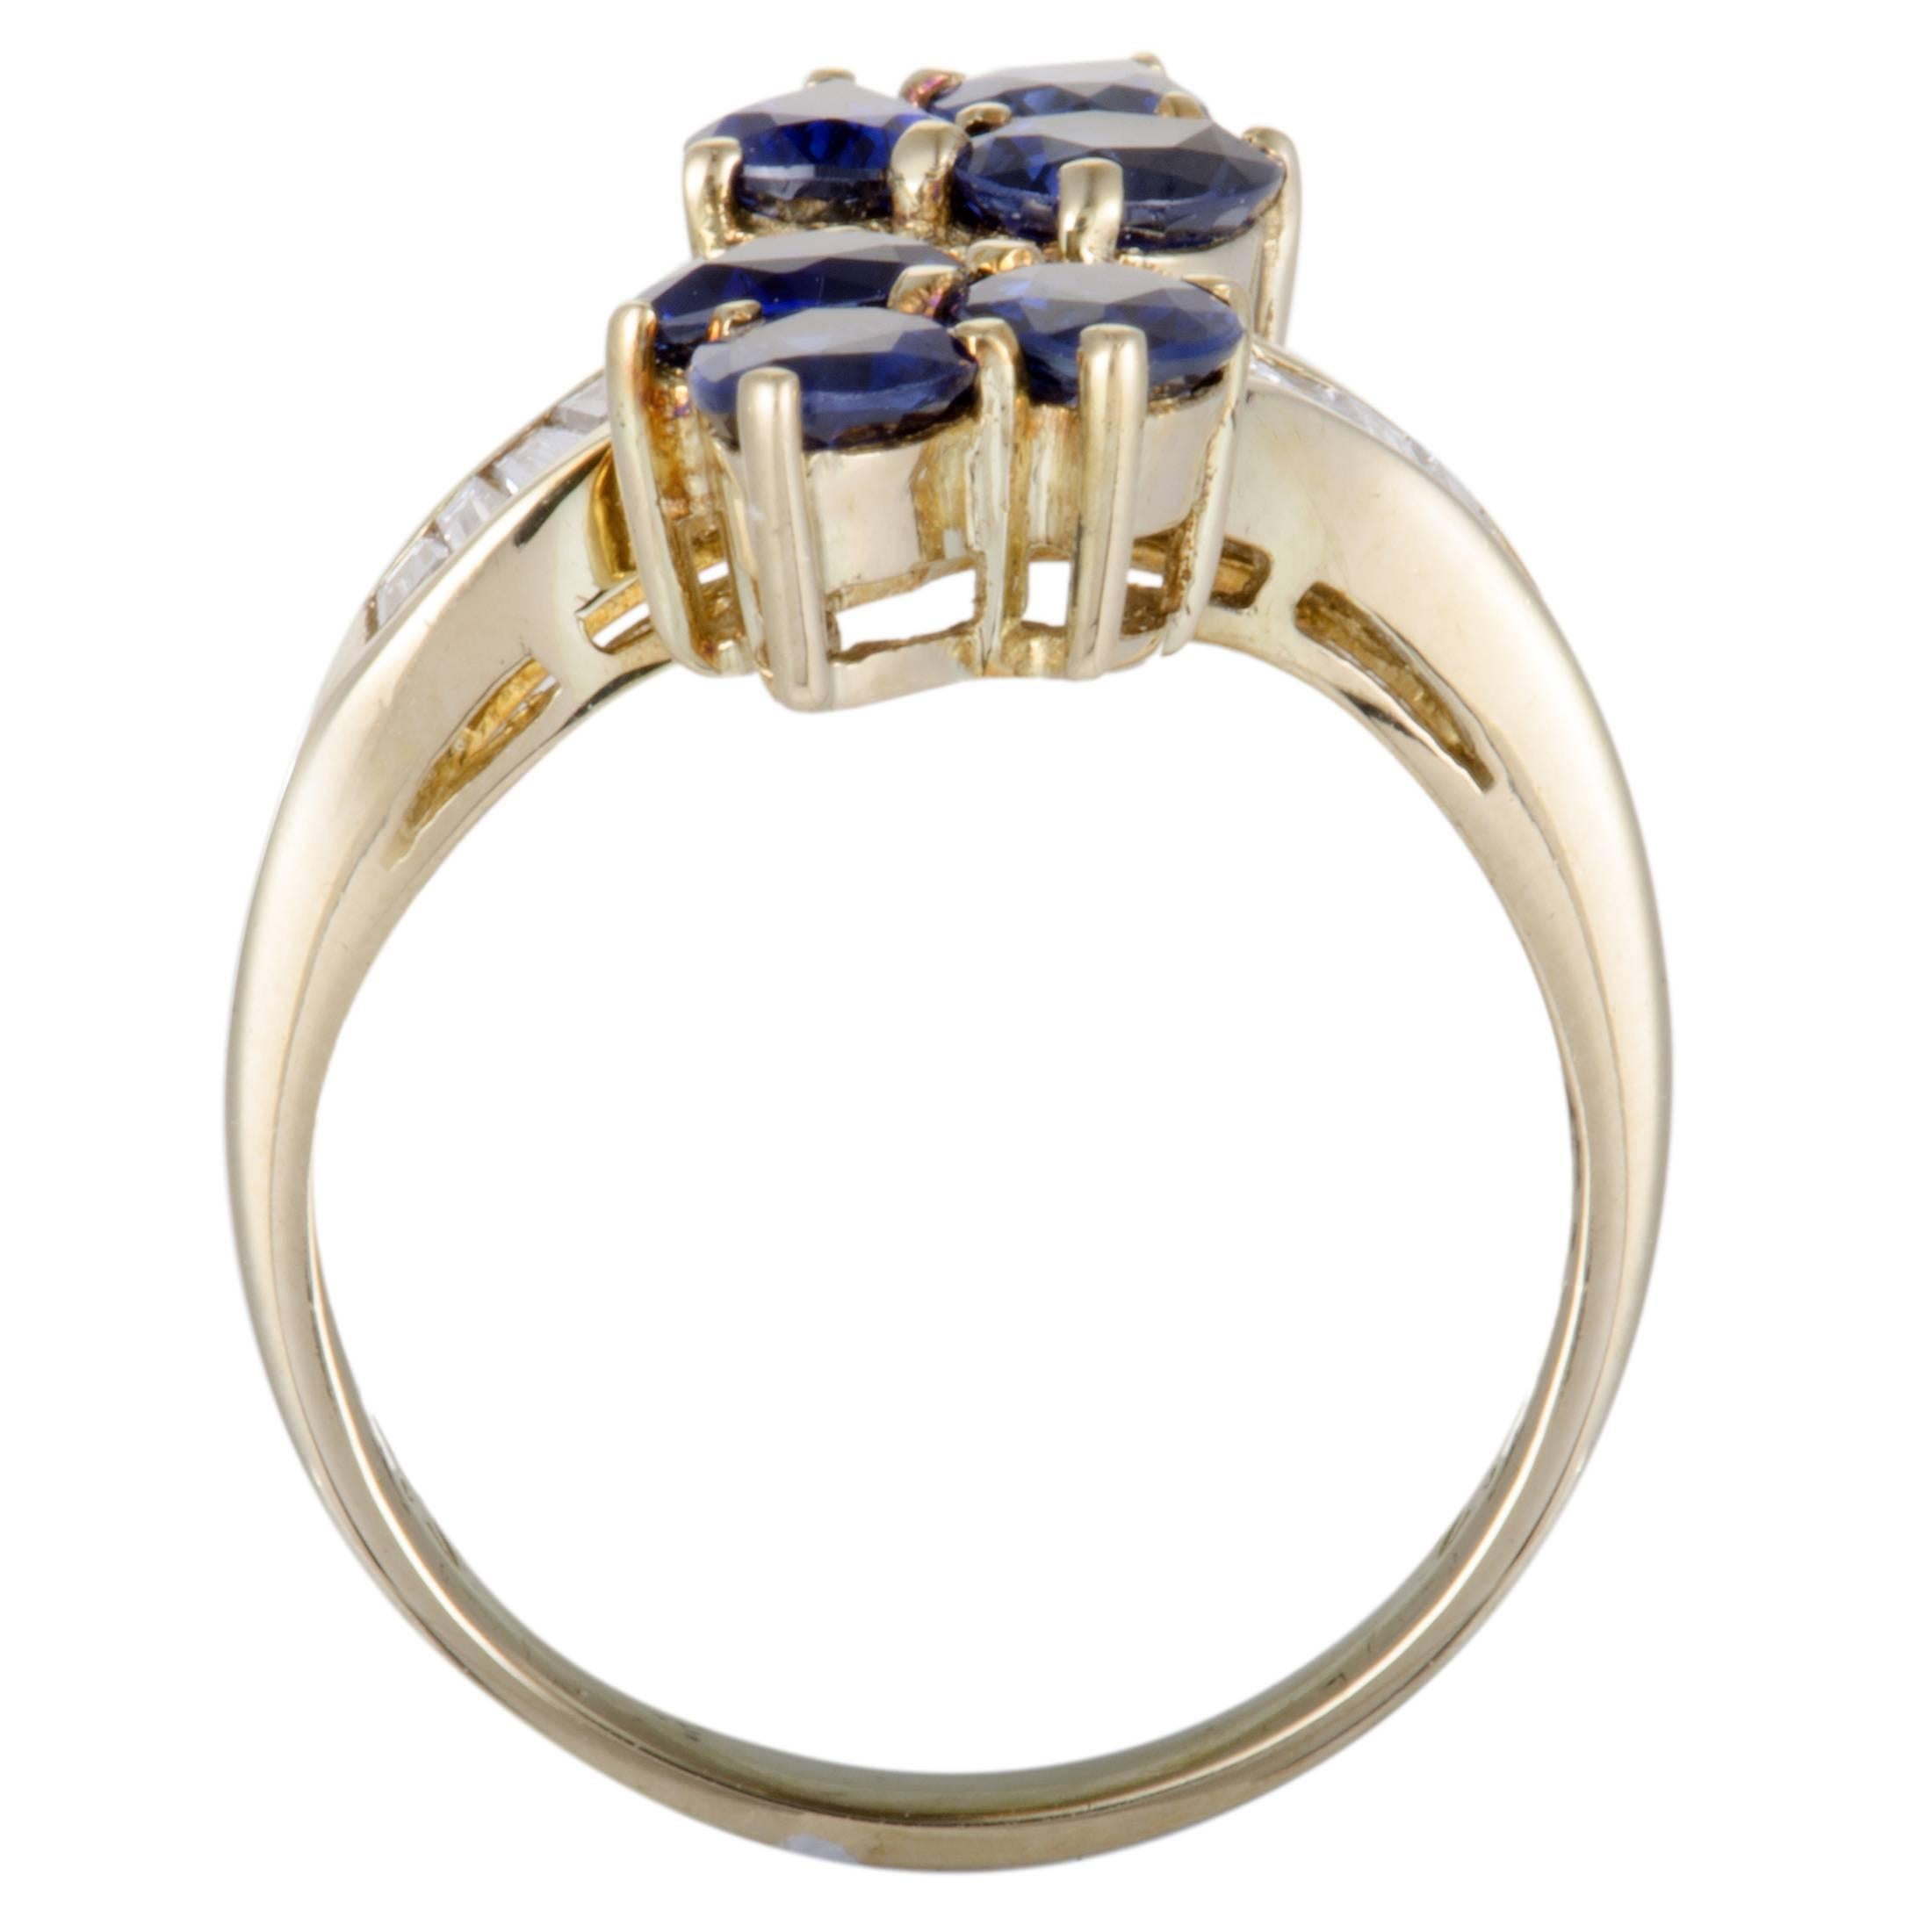 This exquisite ring is an attractive illustration of elegance! Gorgeously designed in shimmering 18K yellow gold, the stunning ring's design is embellished in 0.56ct of scintillating diamonds and 2.42ct of beautiful blue sapphires that enhance the